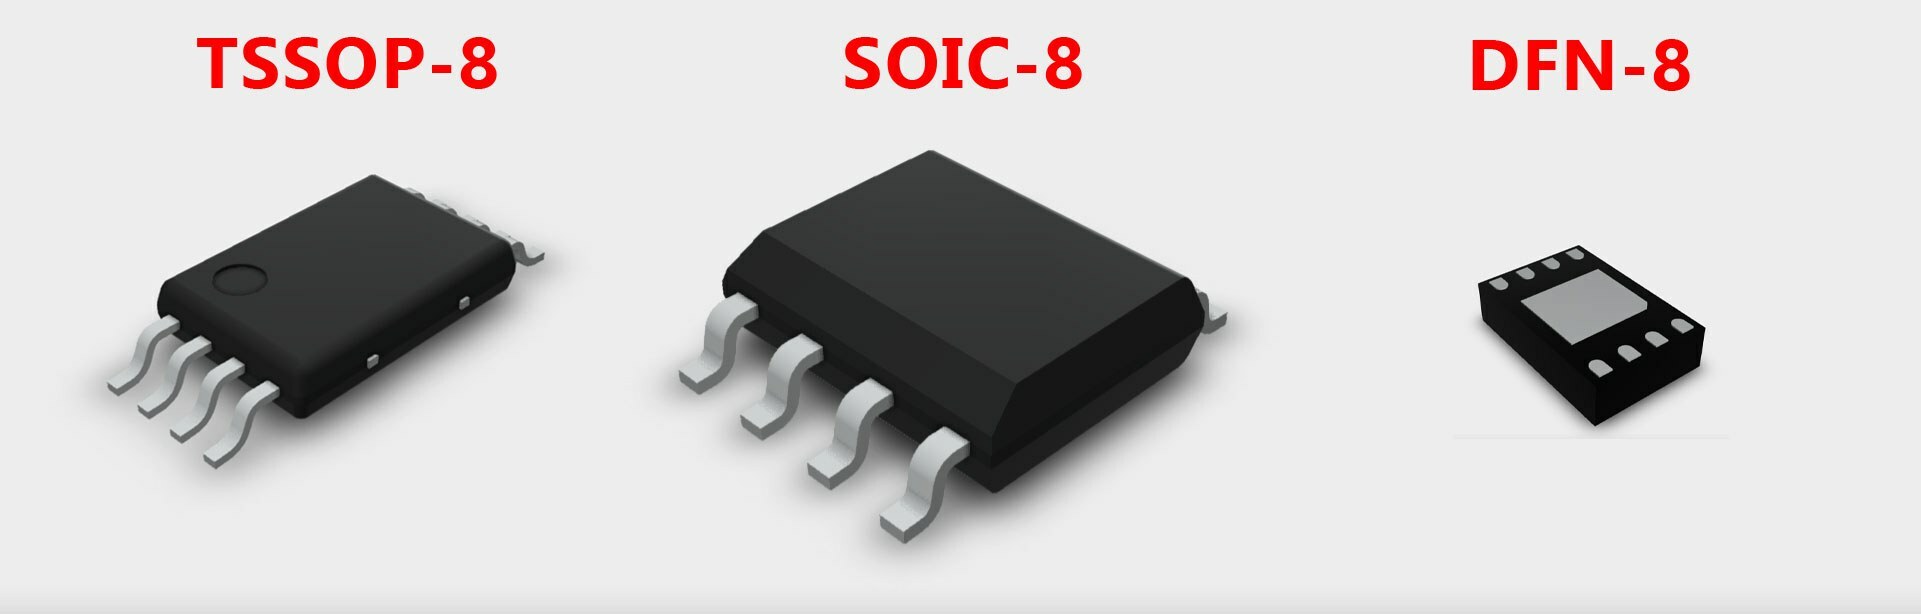 Common EEPROM IC Packages include TSSOP-8, SOIC-8 and DFN-8.